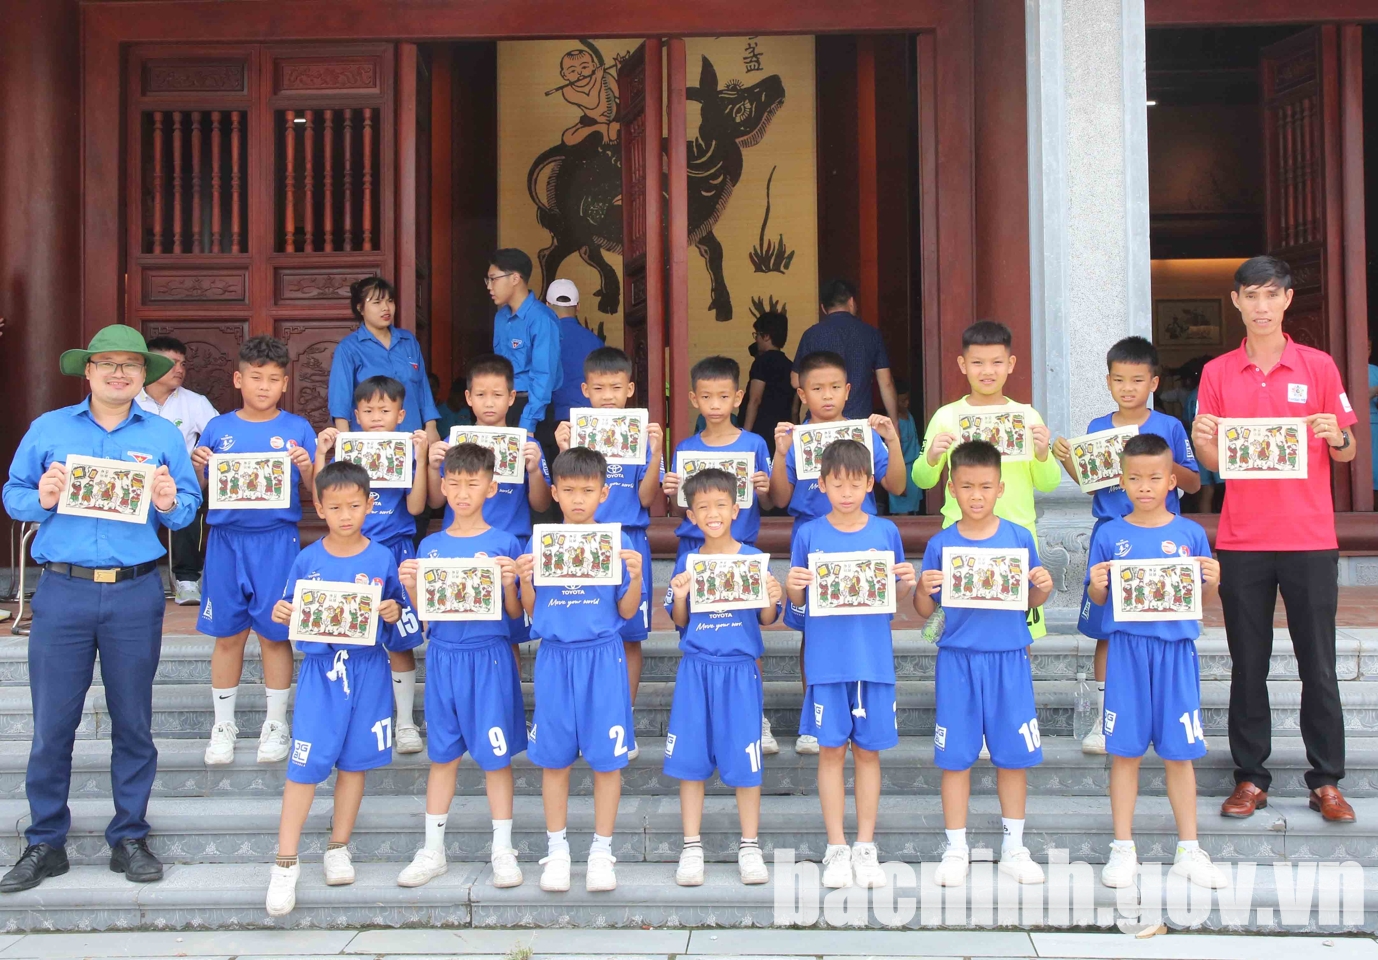 U9 players visit and experience several historical and cultural relics of Bac Ninh